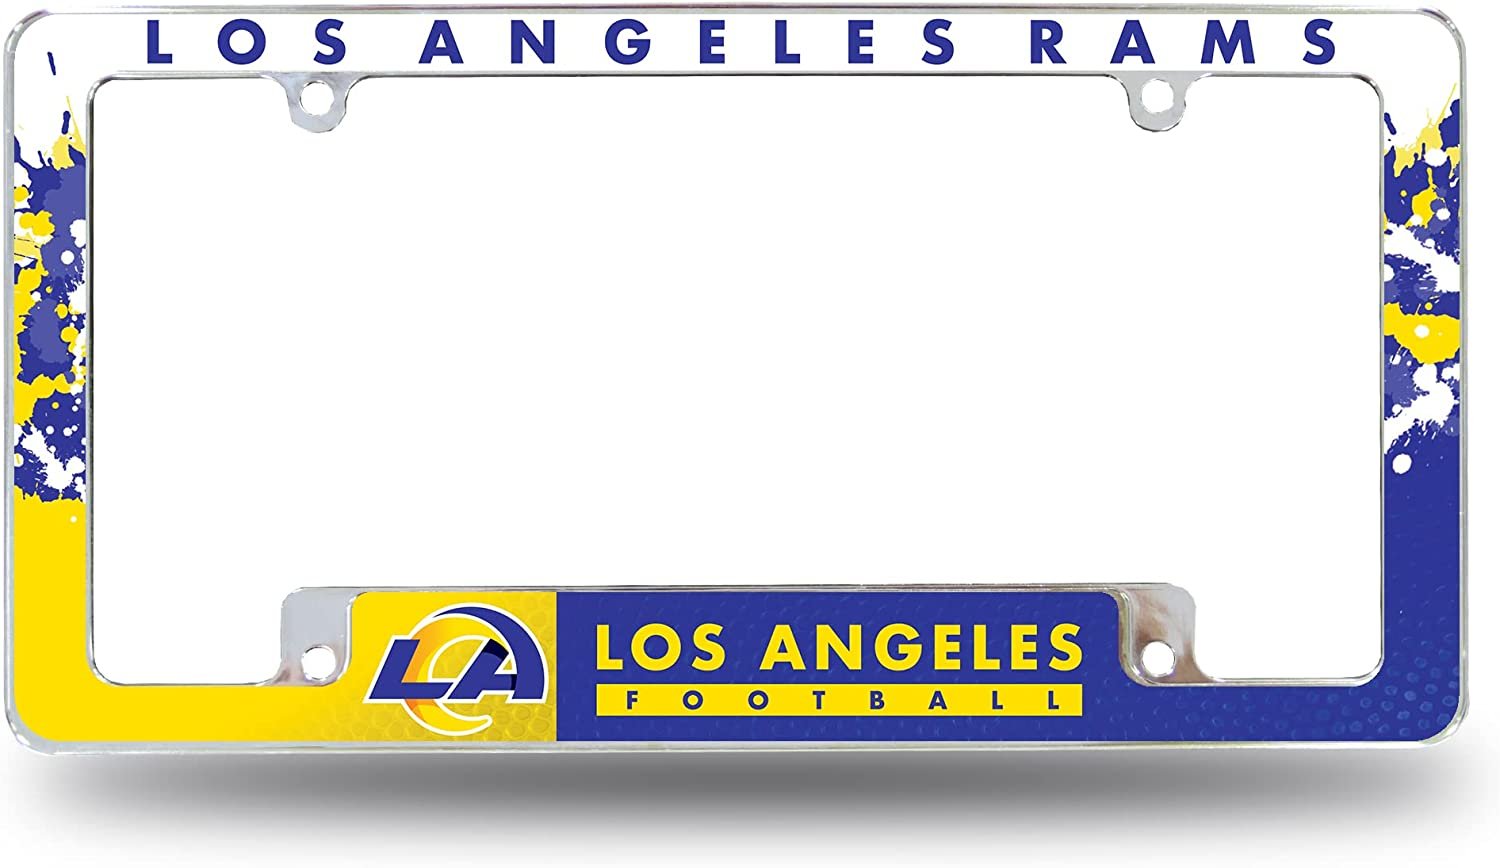 Los Angeles Rams Metal License Plate Frame Chrome Tag Cover All Over Design 6x12 Inch